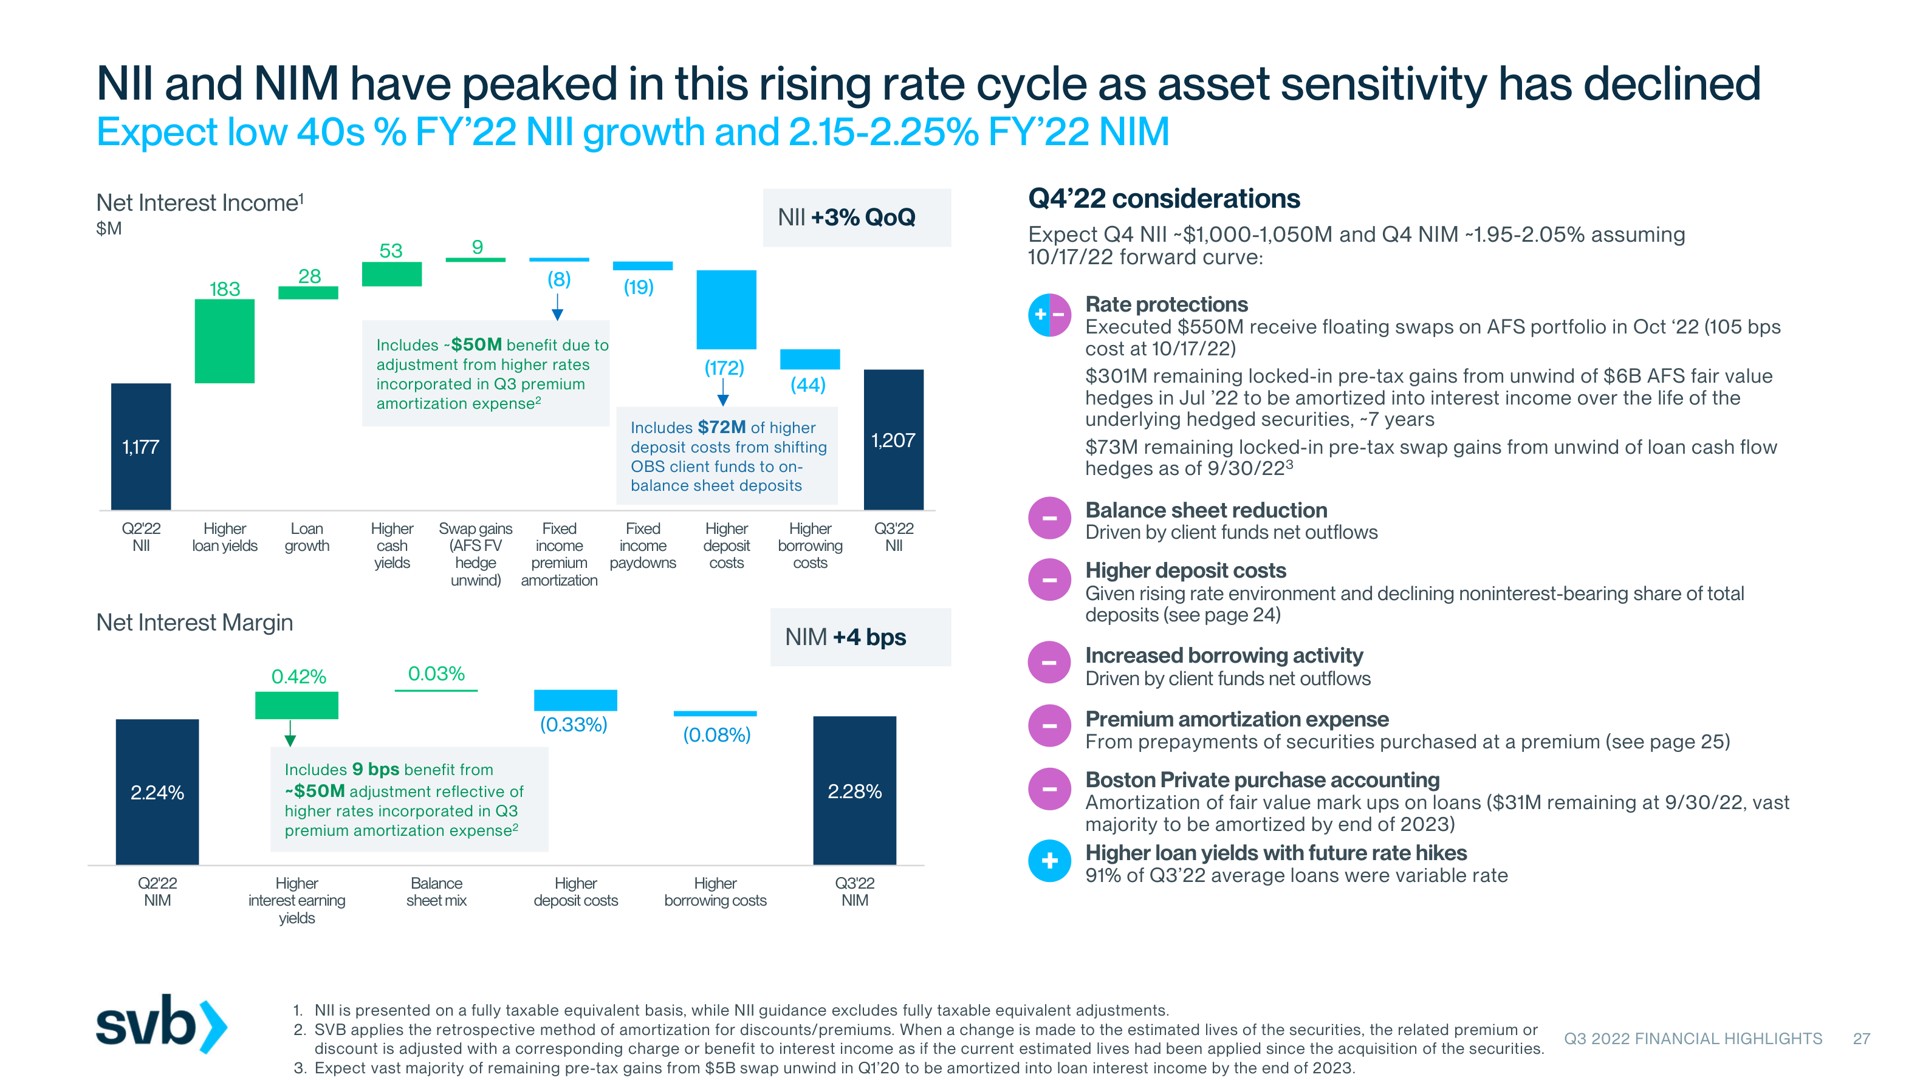 and nim have peaked in this rising rate cycle as asset sensitivity has declined expect low growth and nim nil | Silicon Valley Bank